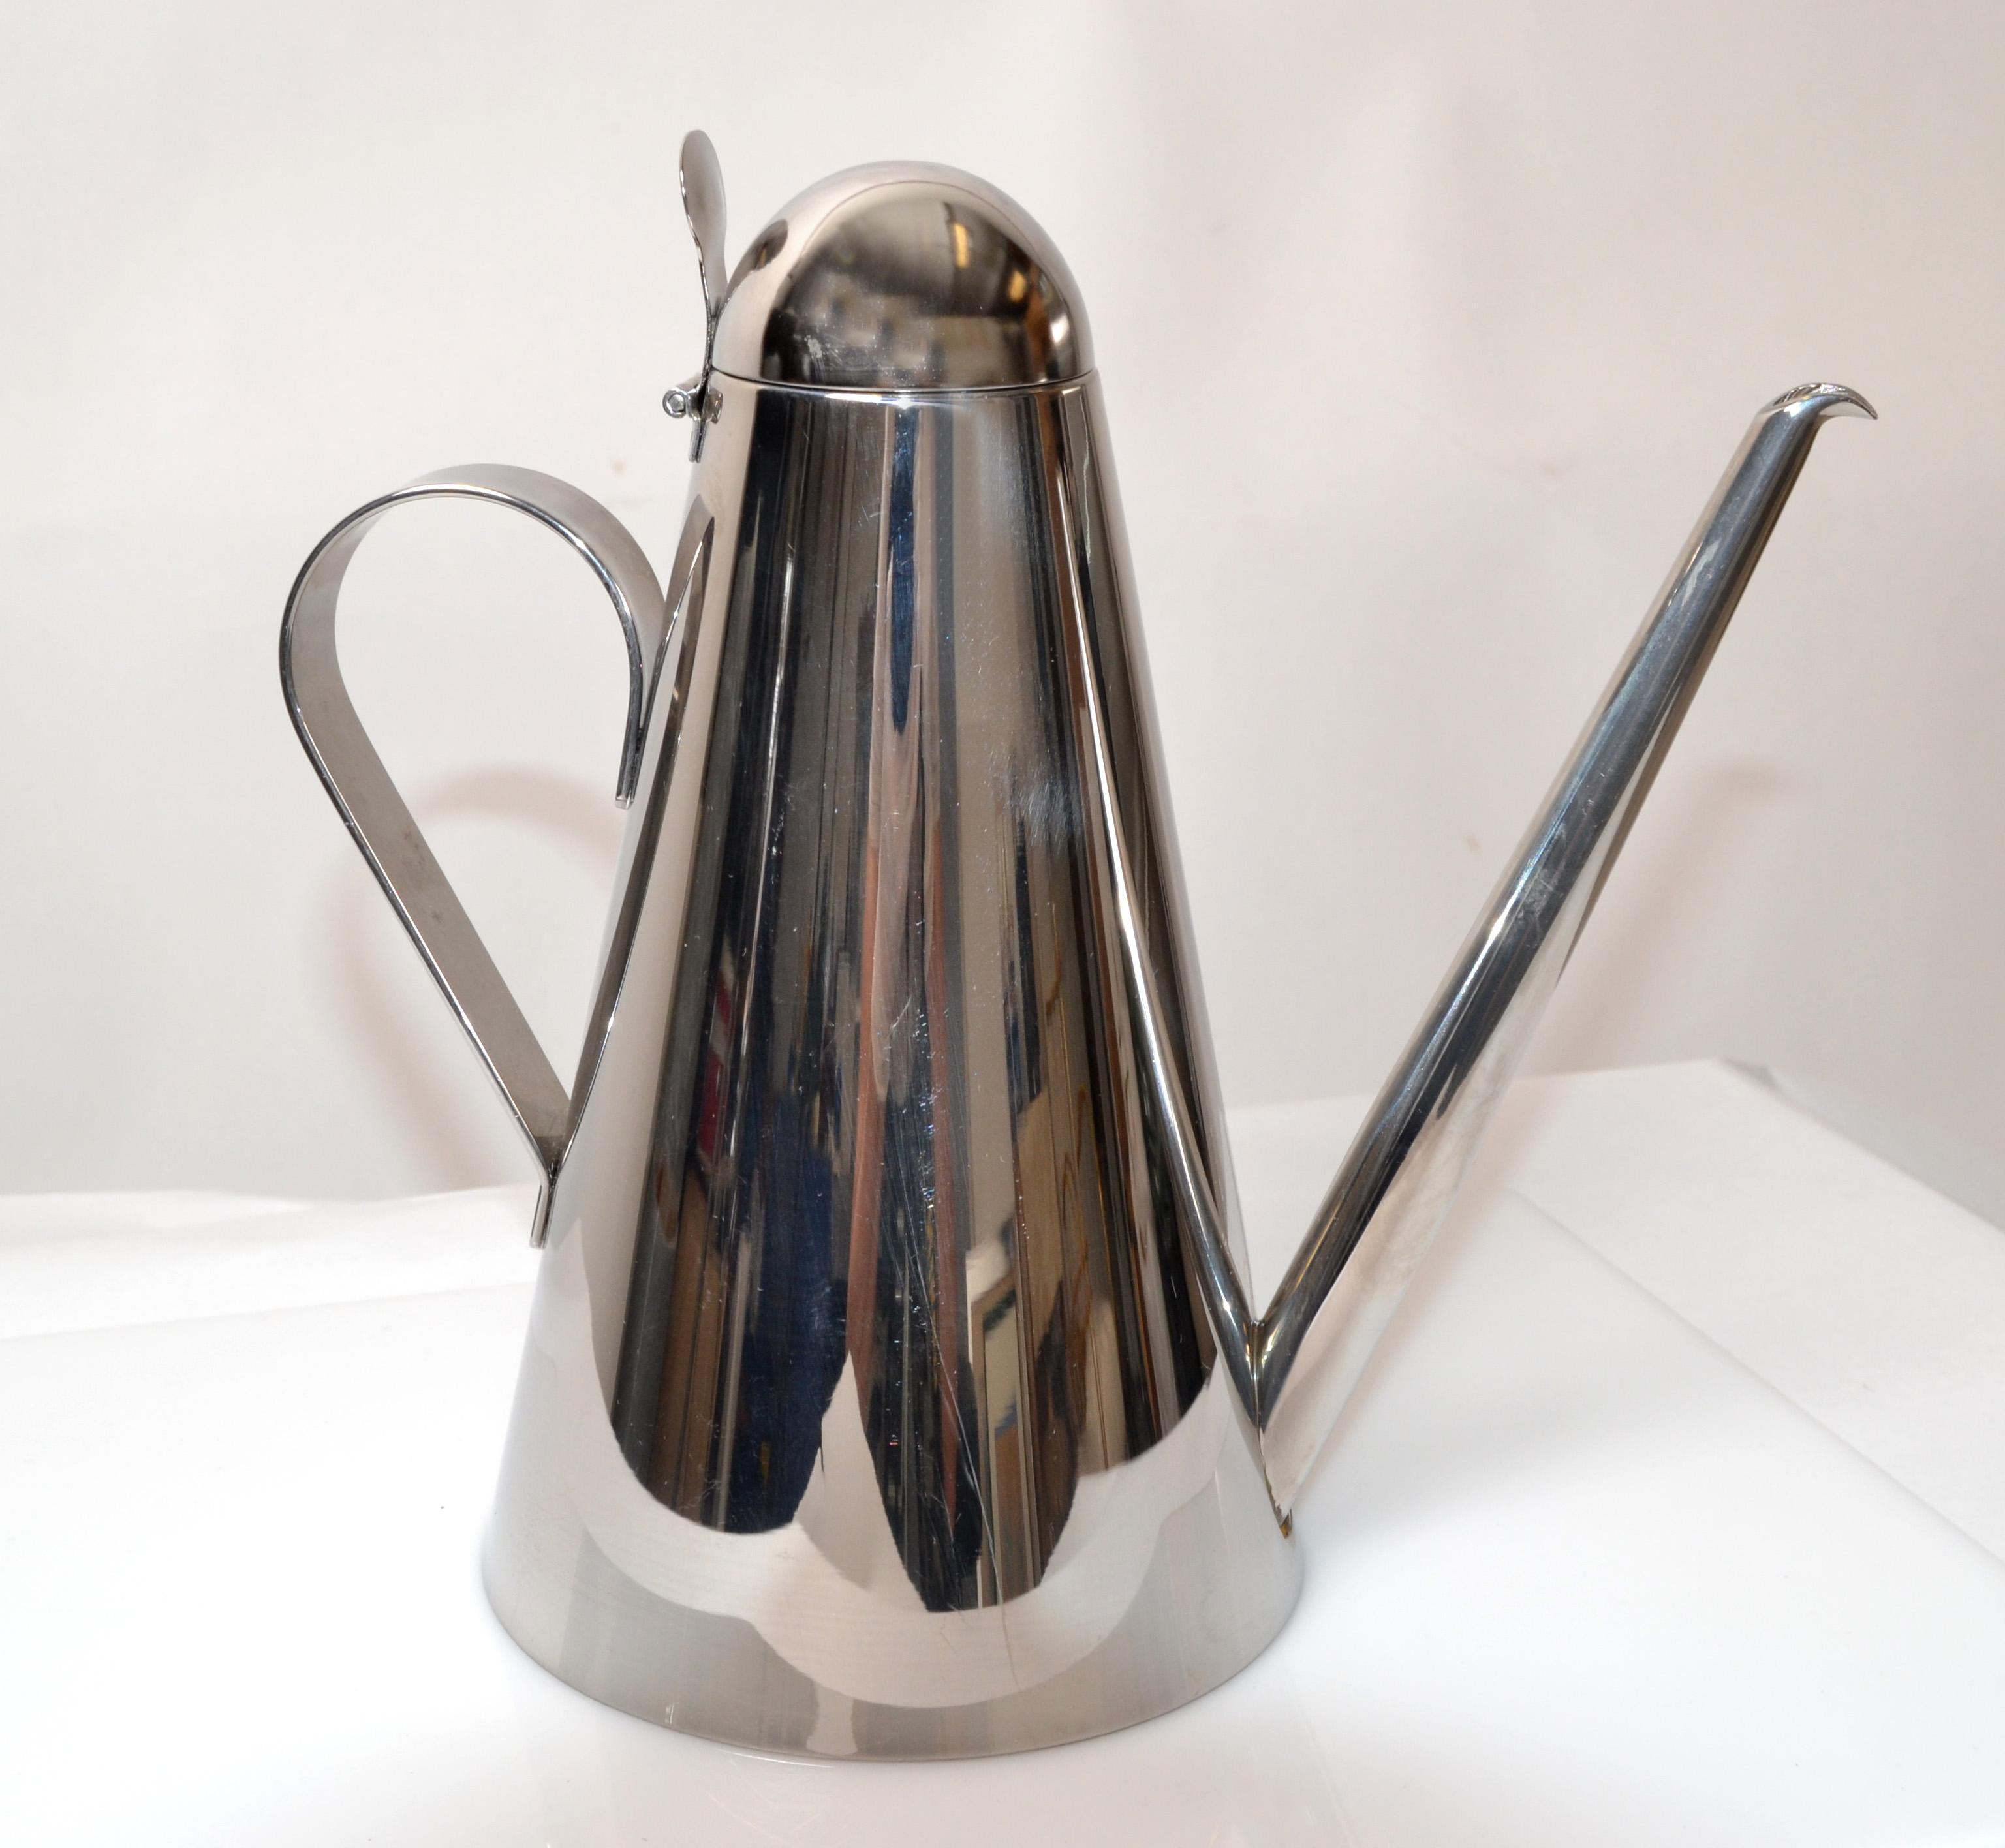 Polished Cerutti Italy Tea, Coffee Pot, Carafe, Vessel INOX 18/10 Stainless Steel For Sale